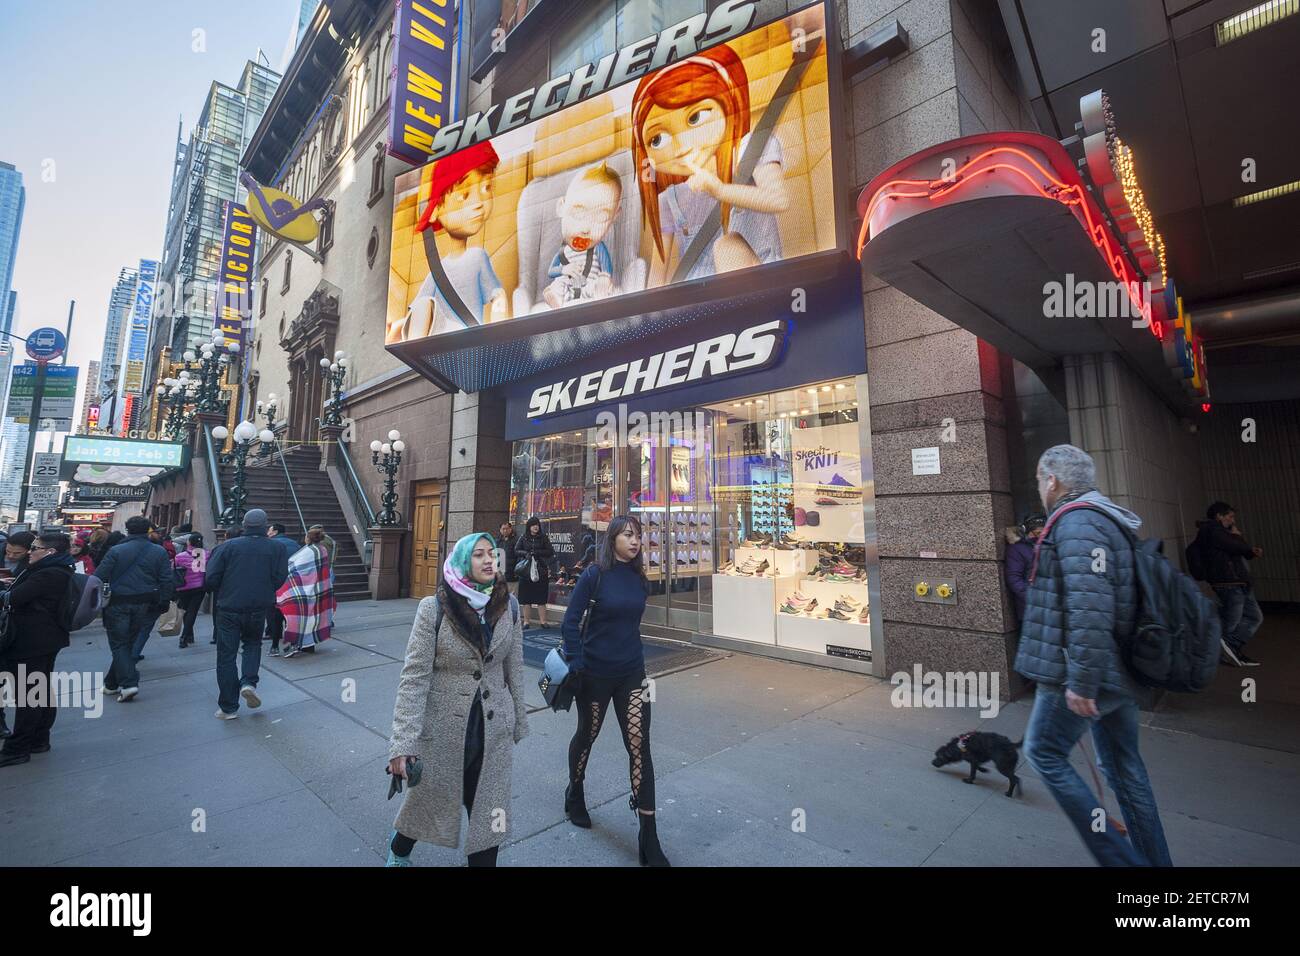 A Skechers store in Times Square in New York on Wednesday, January 25,  2017. Skechers has filed a petition with the Patent Trial and Appeal Board  to invalidate two of Nike's patents.